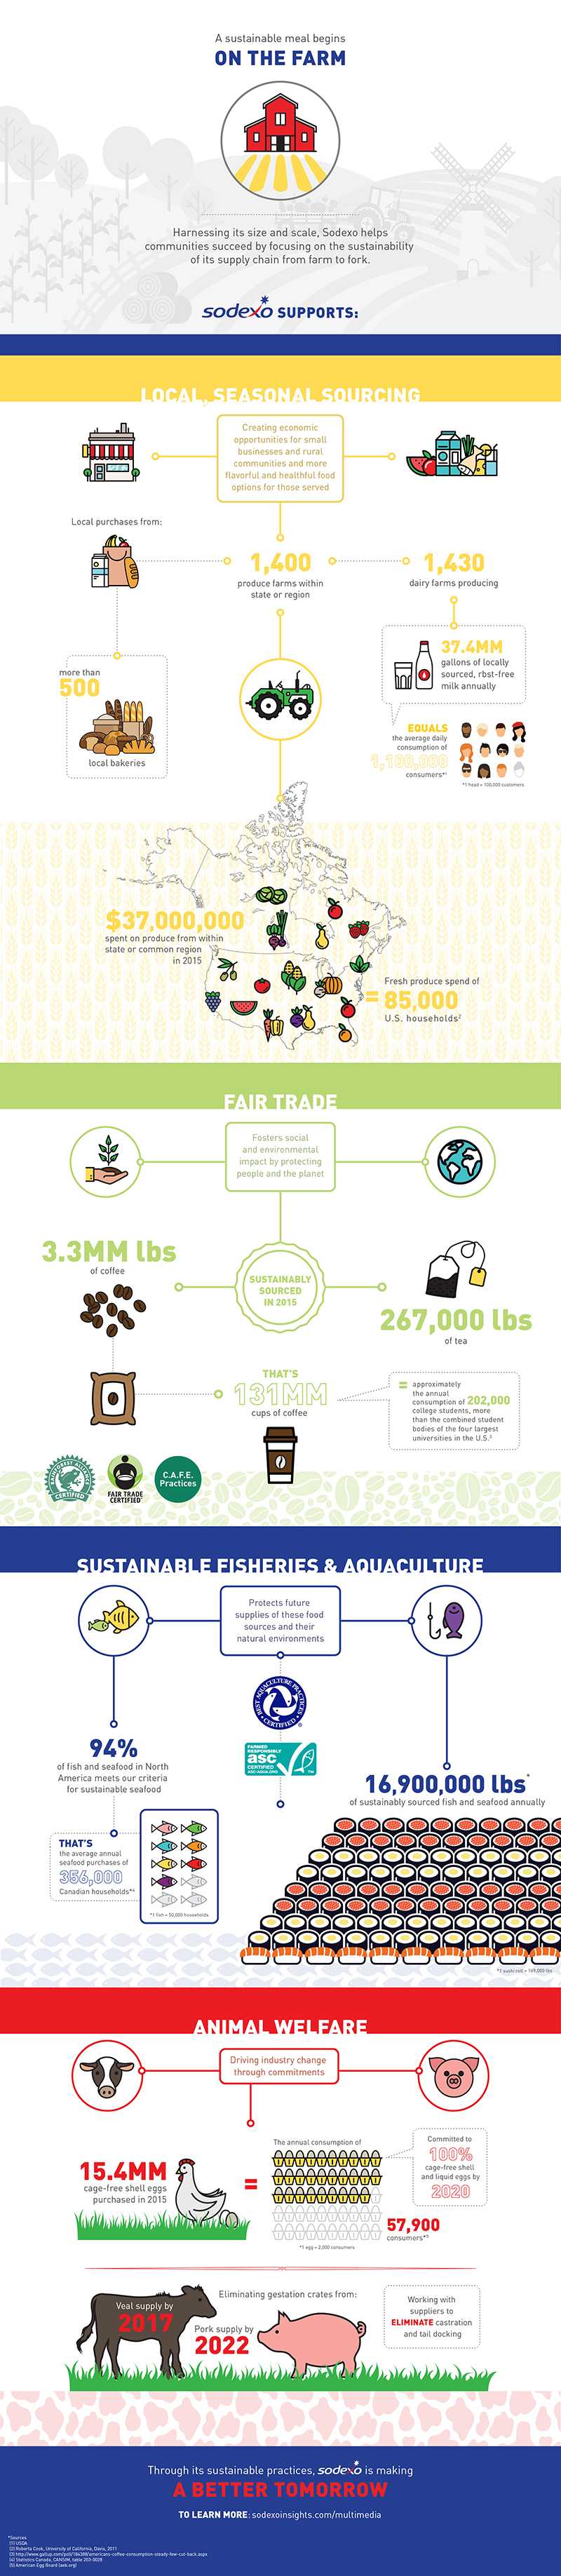 01-On the Farm-Static Infographic-6